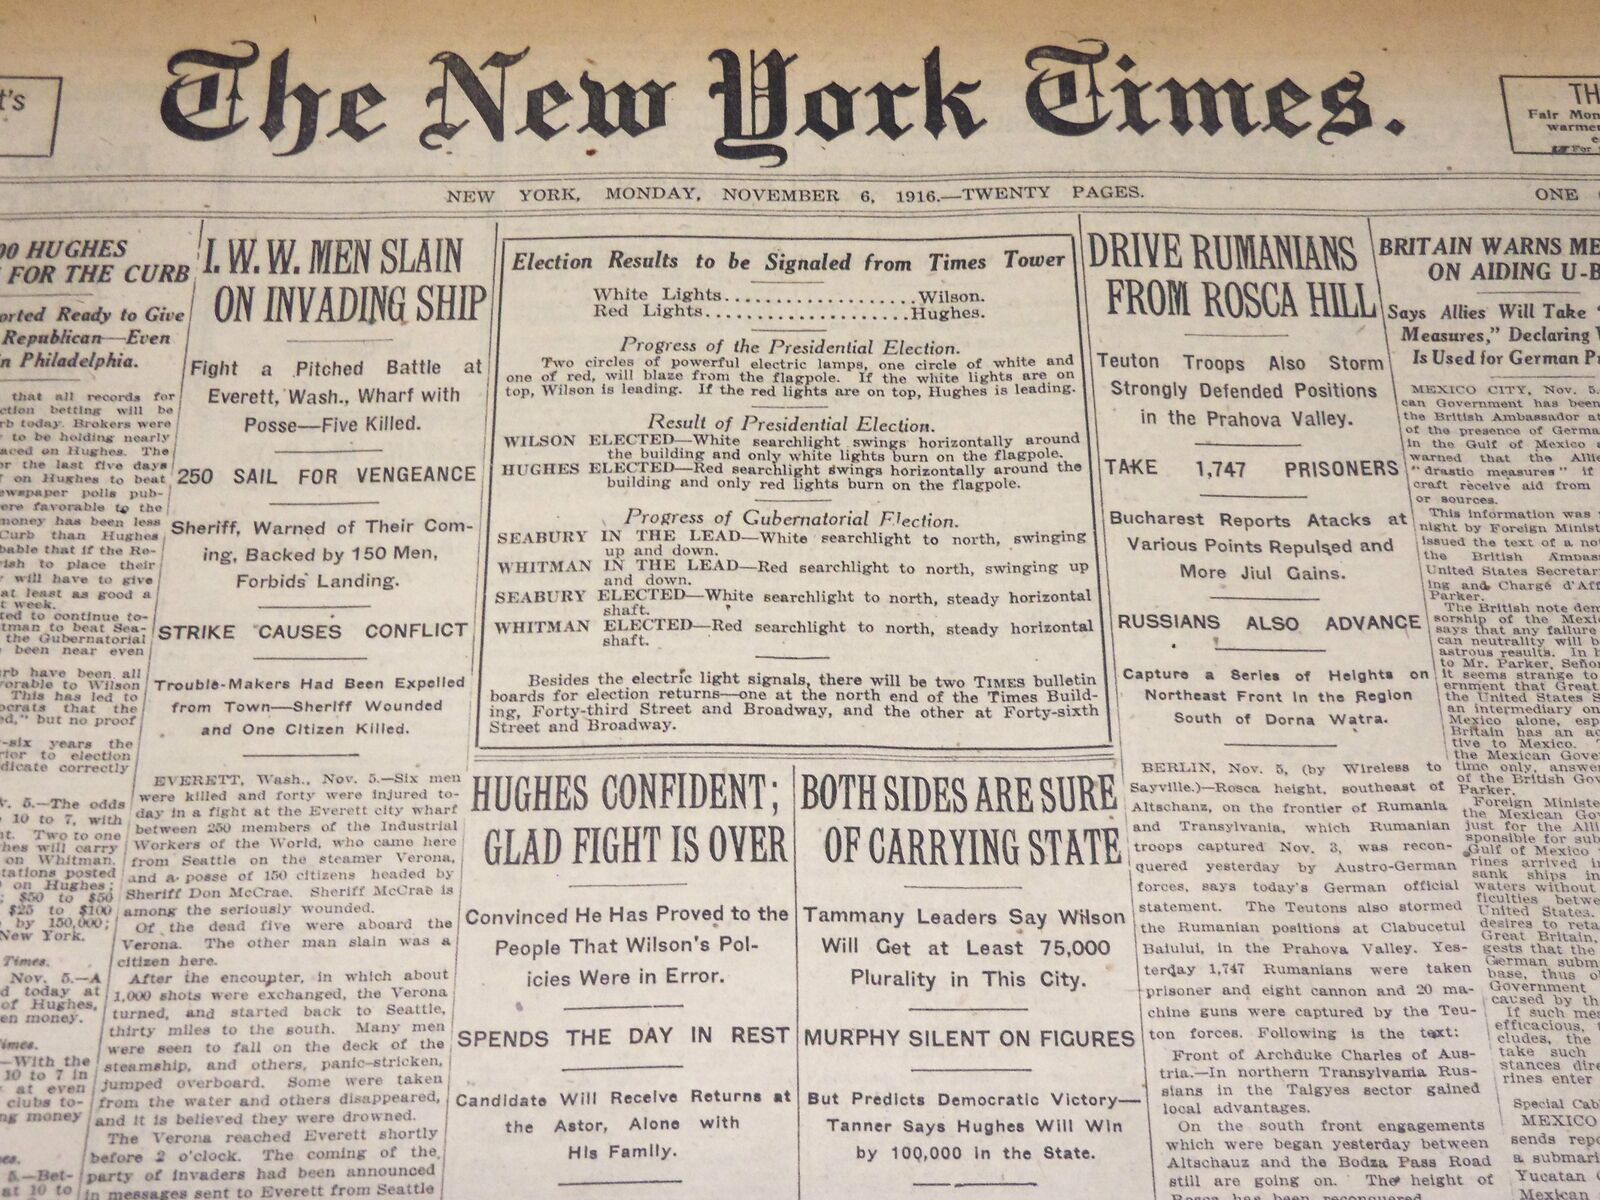 1916 NOVEMBER 6 NEW YORK TIMES - ELECTION RESULTS TO BE SIGNALED - NT 7685